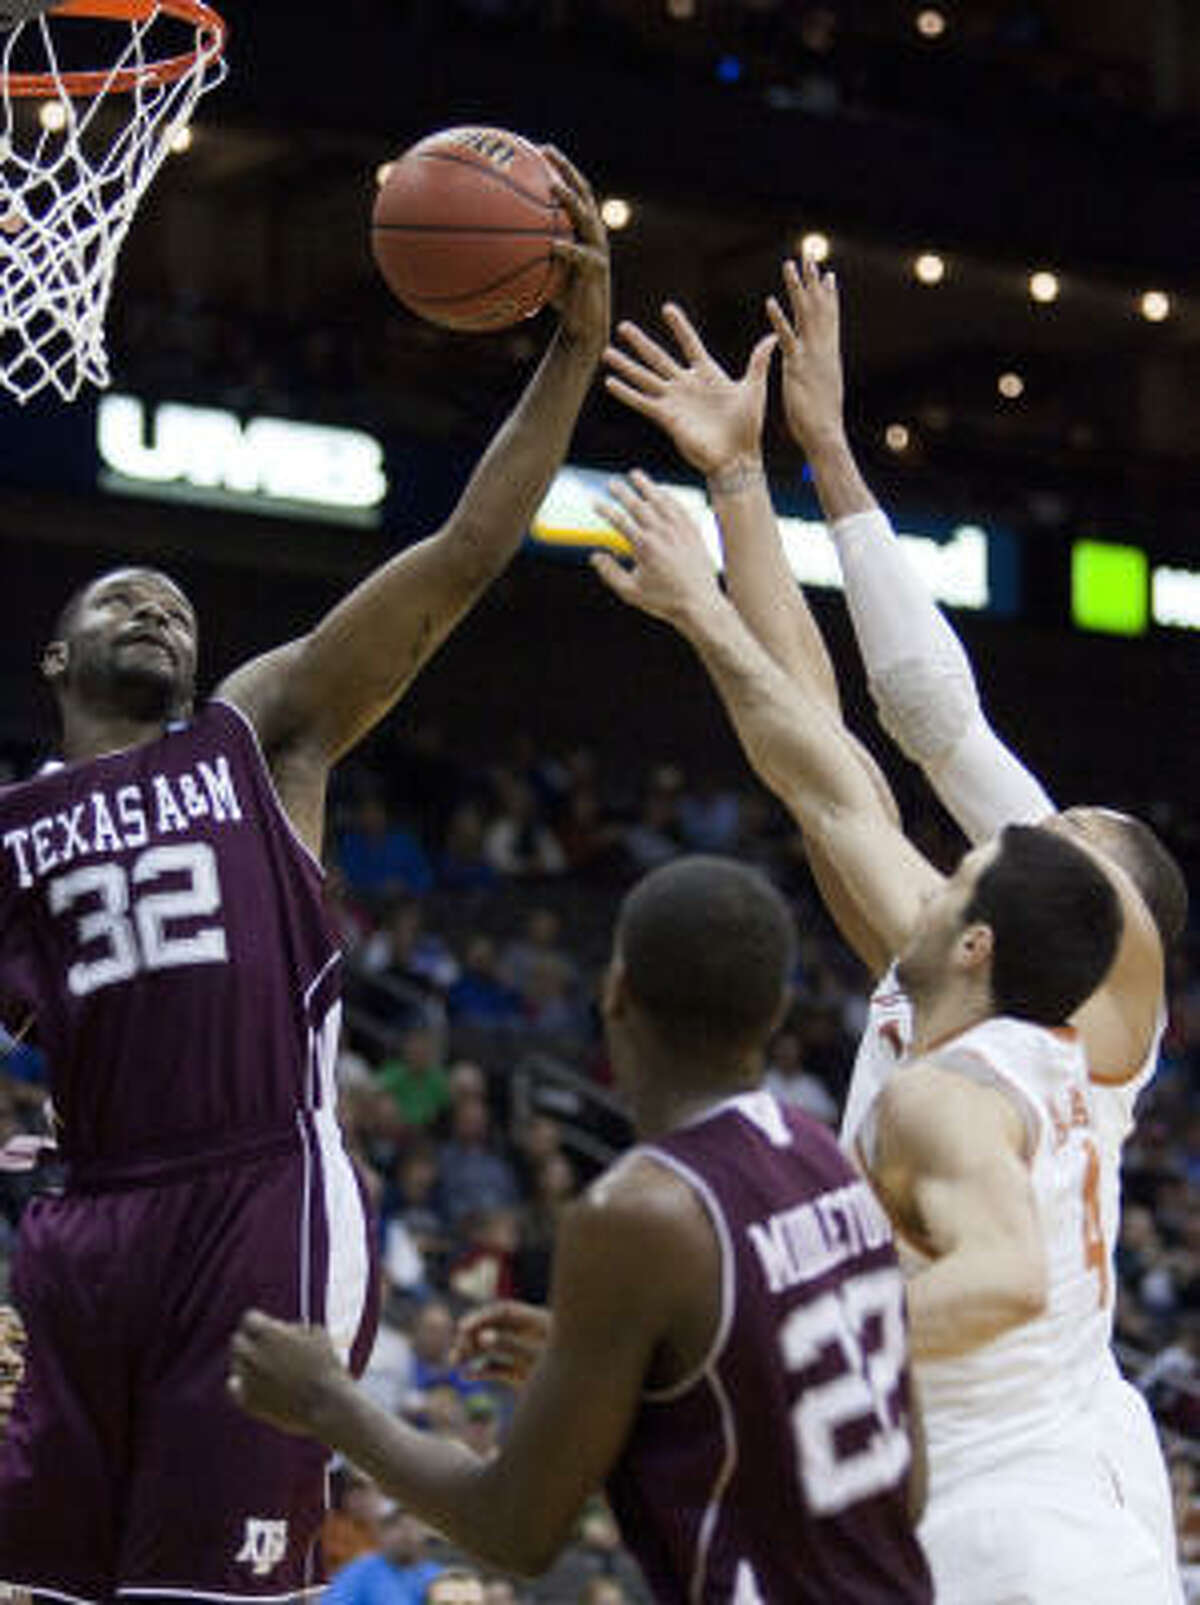 Texas A&M's Kourtney Roberson (32) grabs a rebound in front of teammate Khris Middleton (22) and Texas' Dogus Balbay (4) aTristan Thompson in the second half.